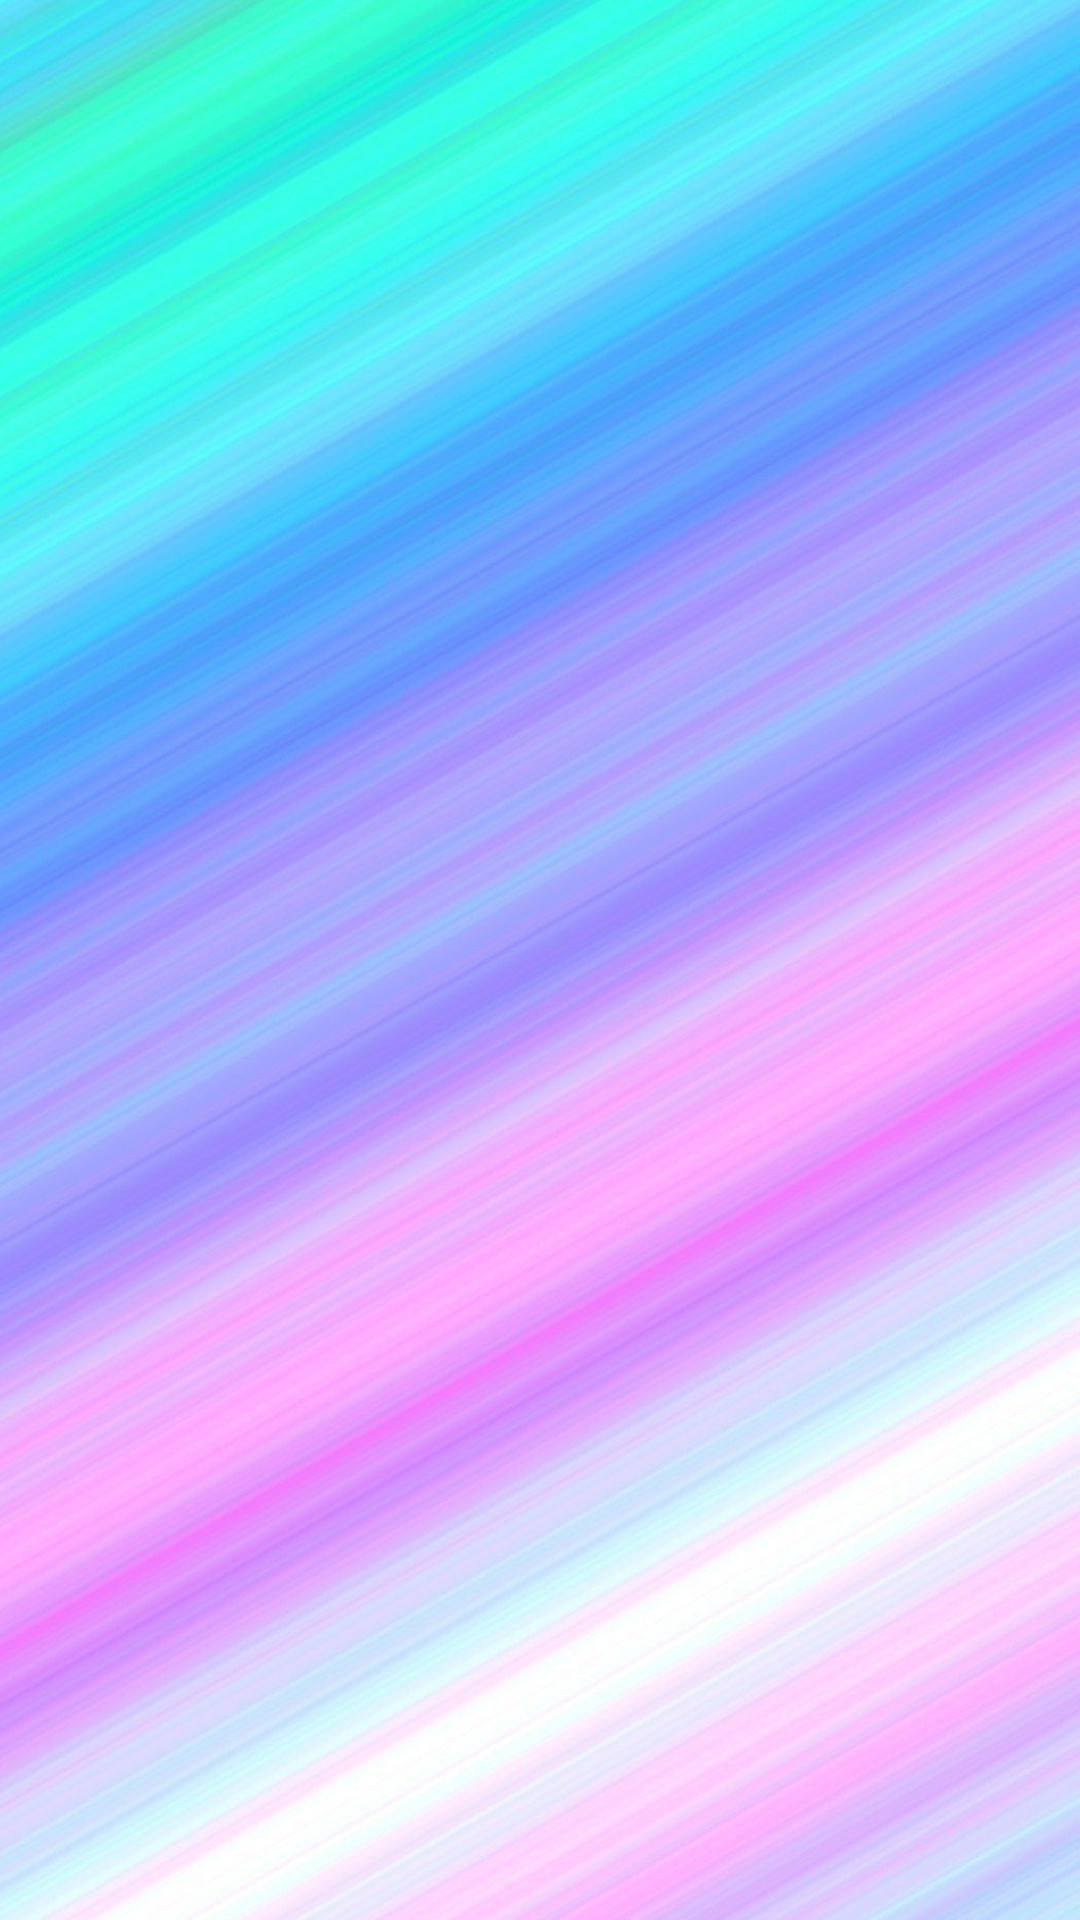 Pastels – Abstract Colorful Pink Blue Galaxy Wallpaper for Samsung